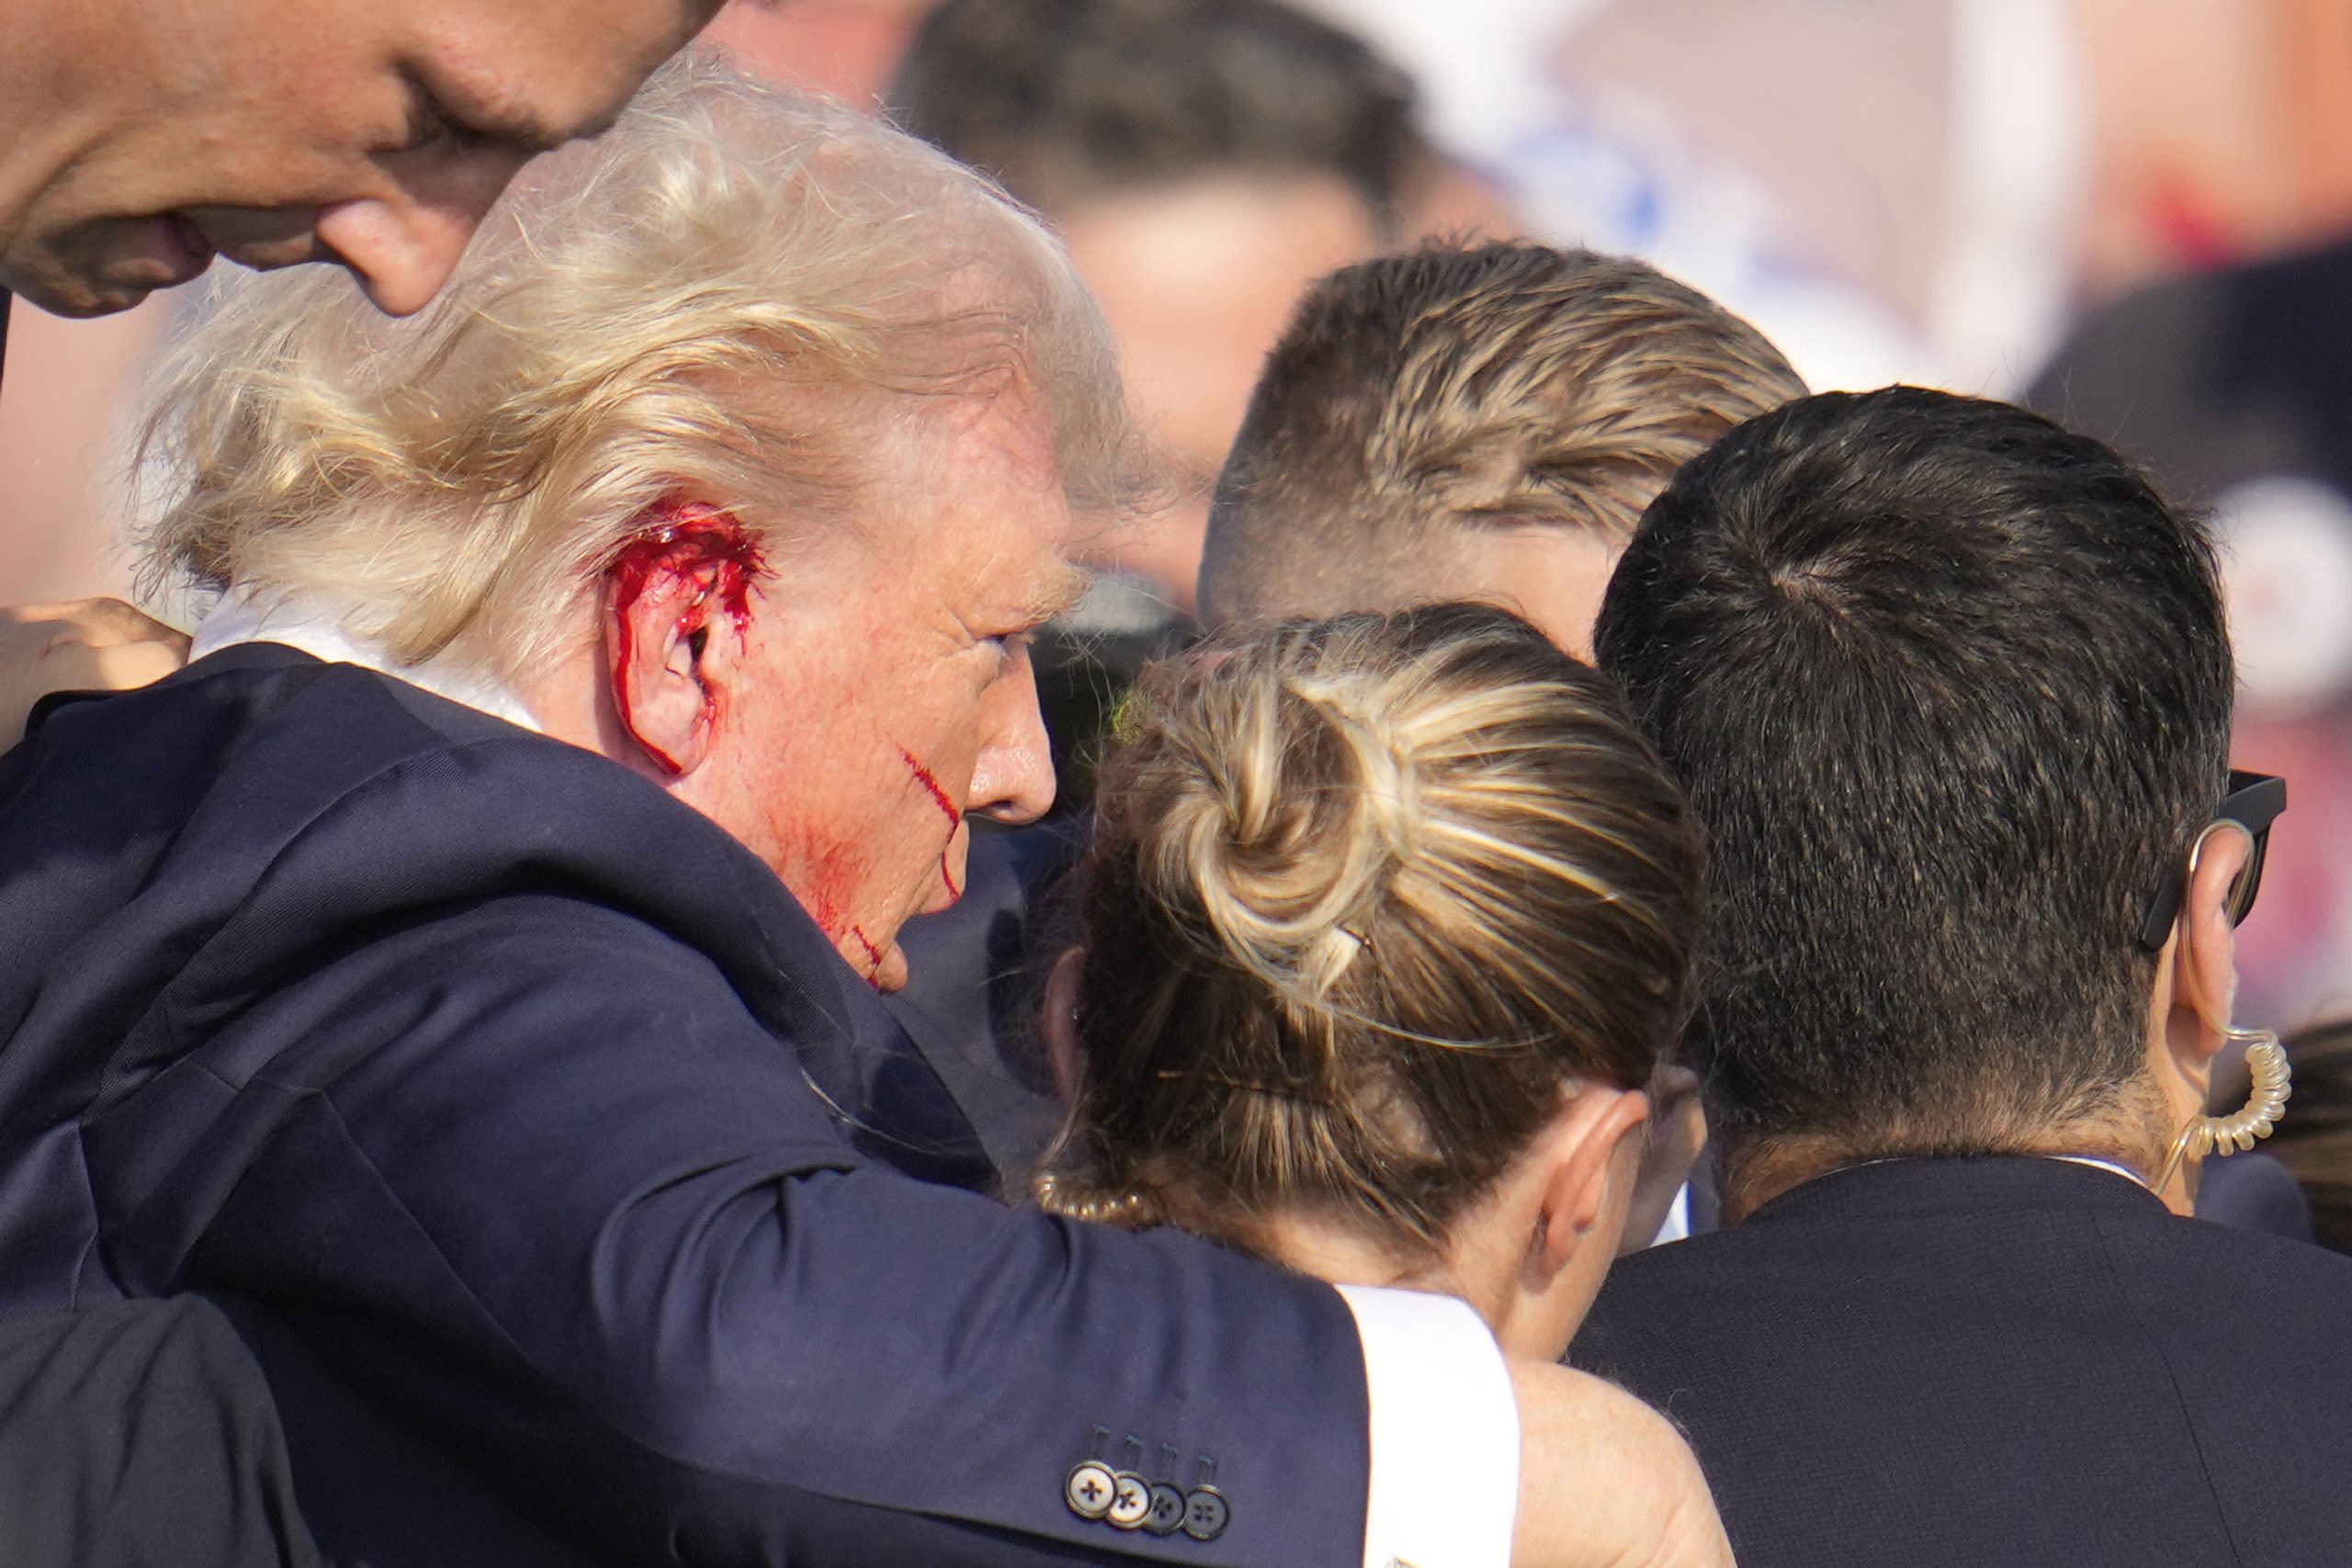 Donald Trump appeared to be the target of an assassination attempt. Here's what to know.